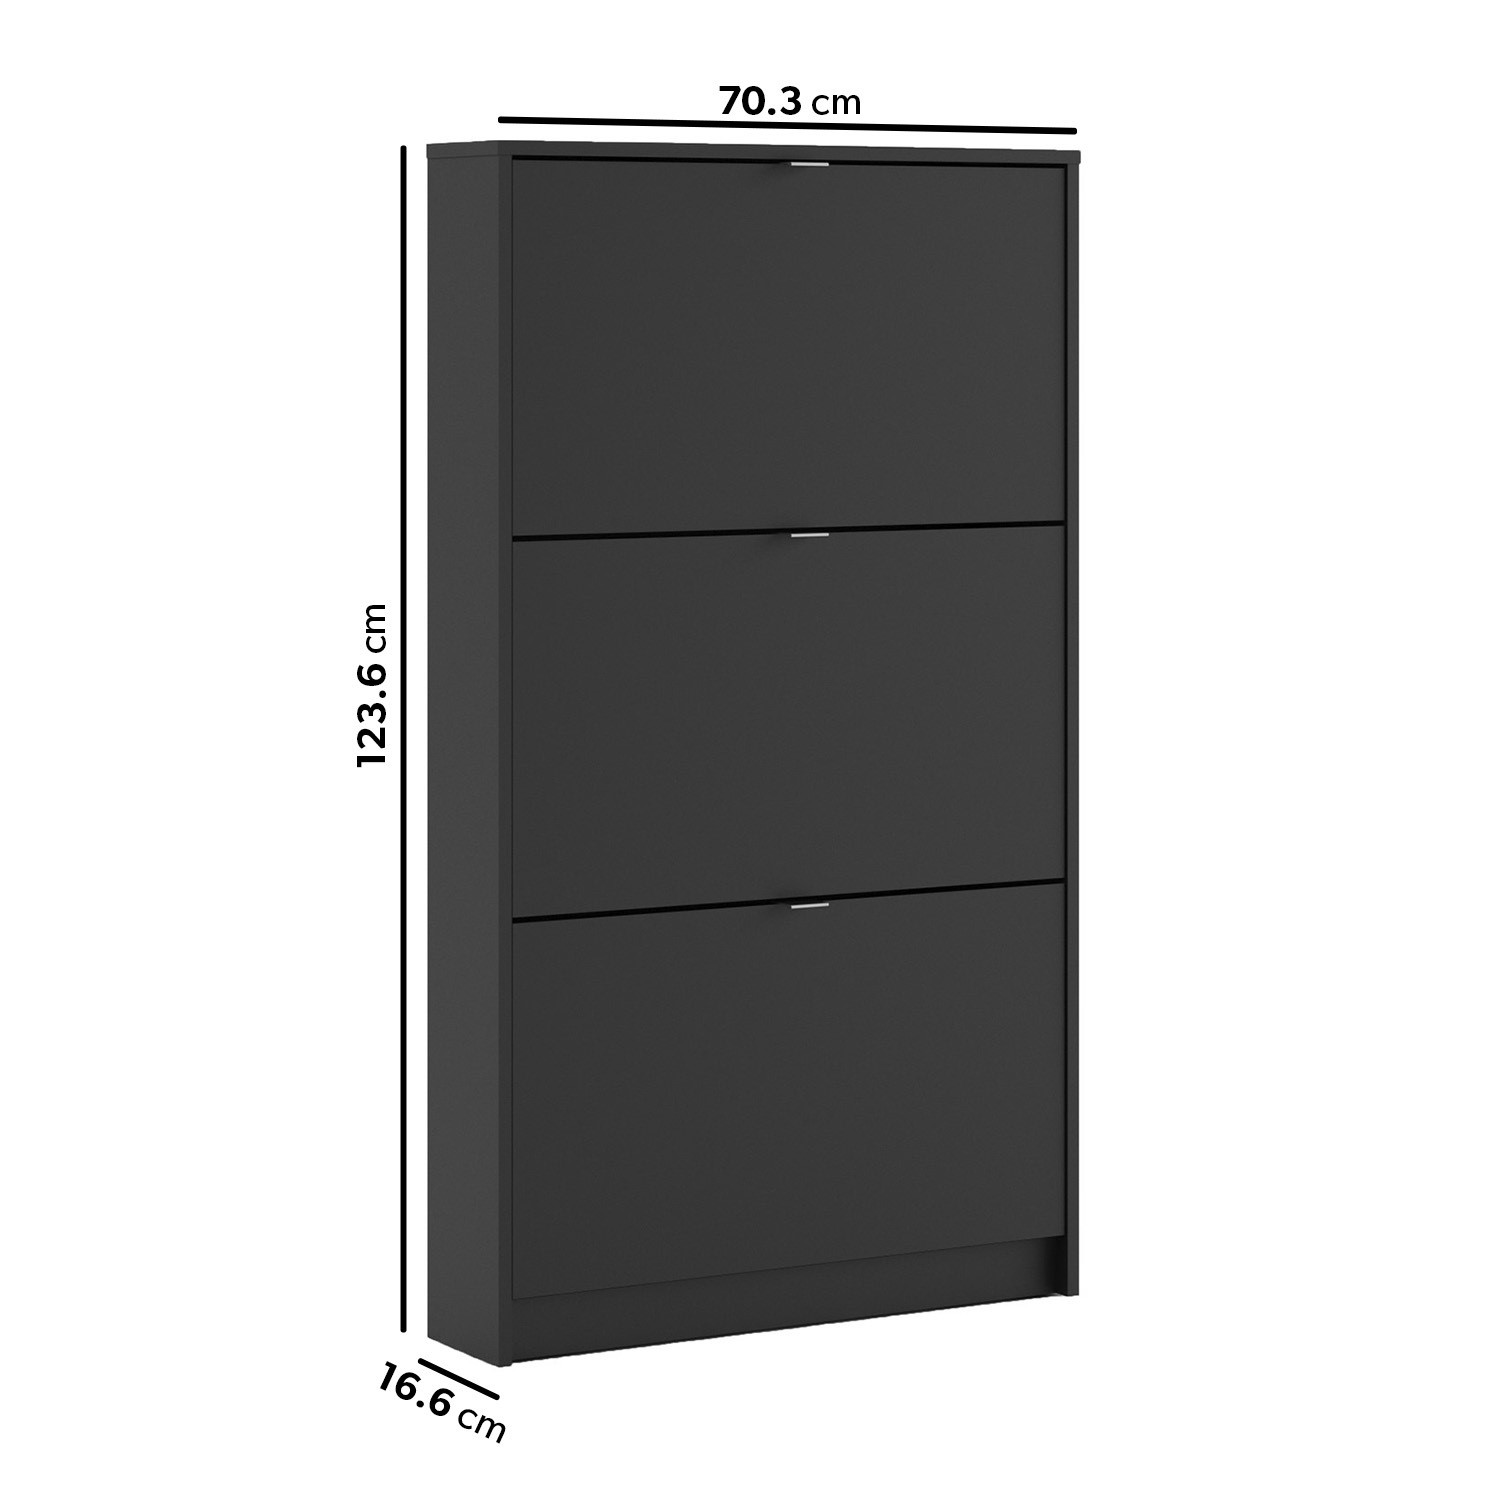 Read more about Slim matt black wall hung shoe cabinet with 3 drawers 9 pairs